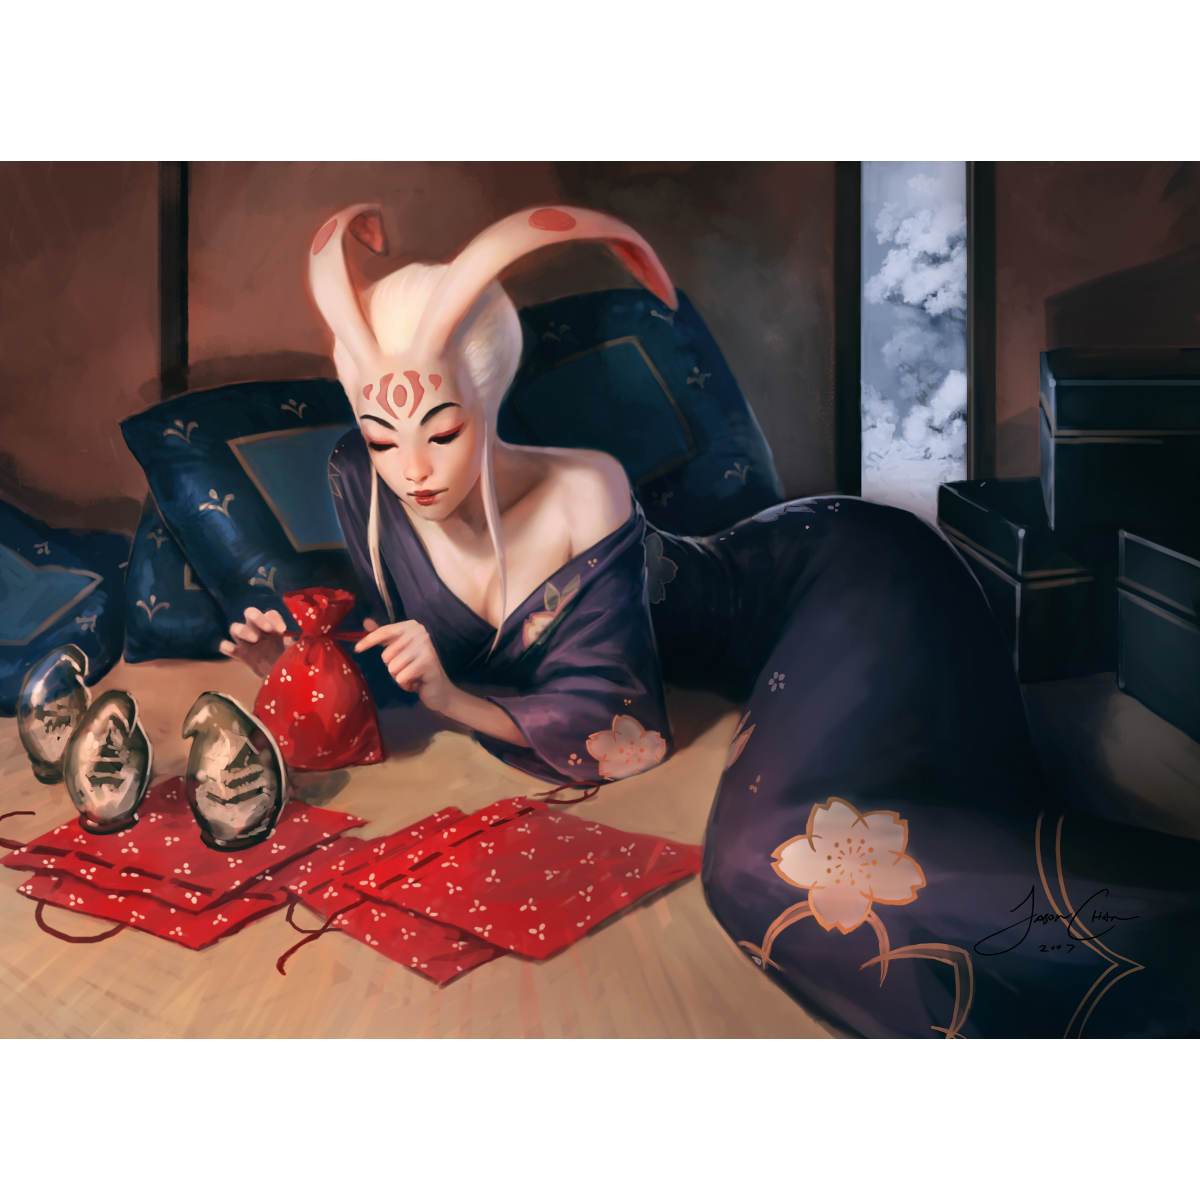 Gifts Given Print - Print - Original Magic Art - Accessories for Magic the Gathering and other card games